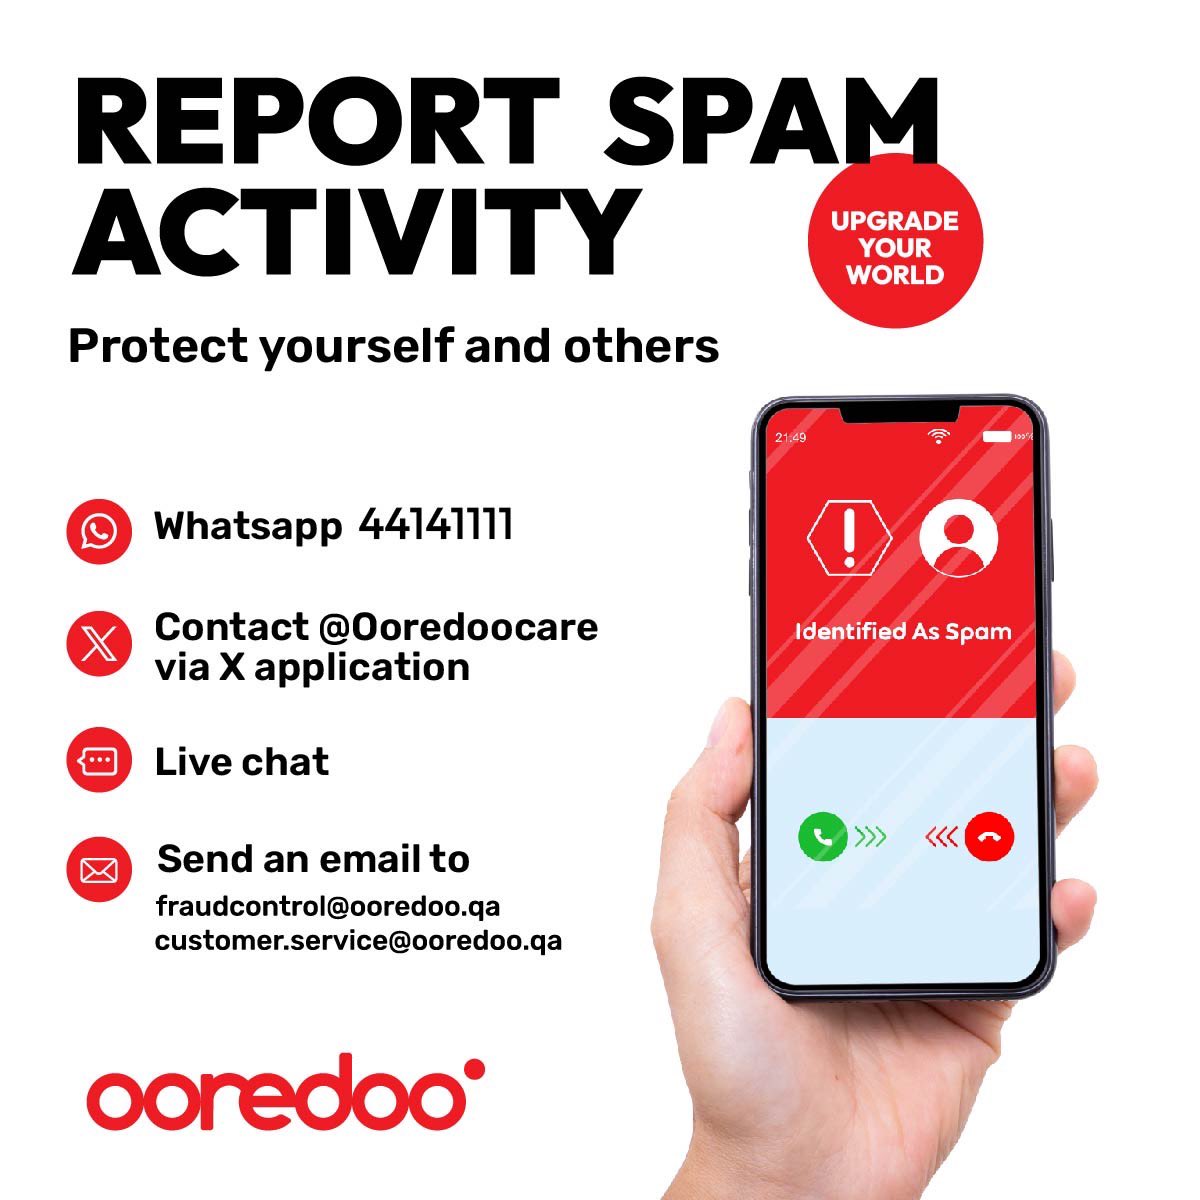 🔴 Stay vigilant and protect yourself! Beware of scammers impersonating legitimate organizations. Do NOT share personal information or OTPs. Fraudsters may use local/international numbers or OTT apps to deceive for money/info. If contacted, block and report suspicious activity